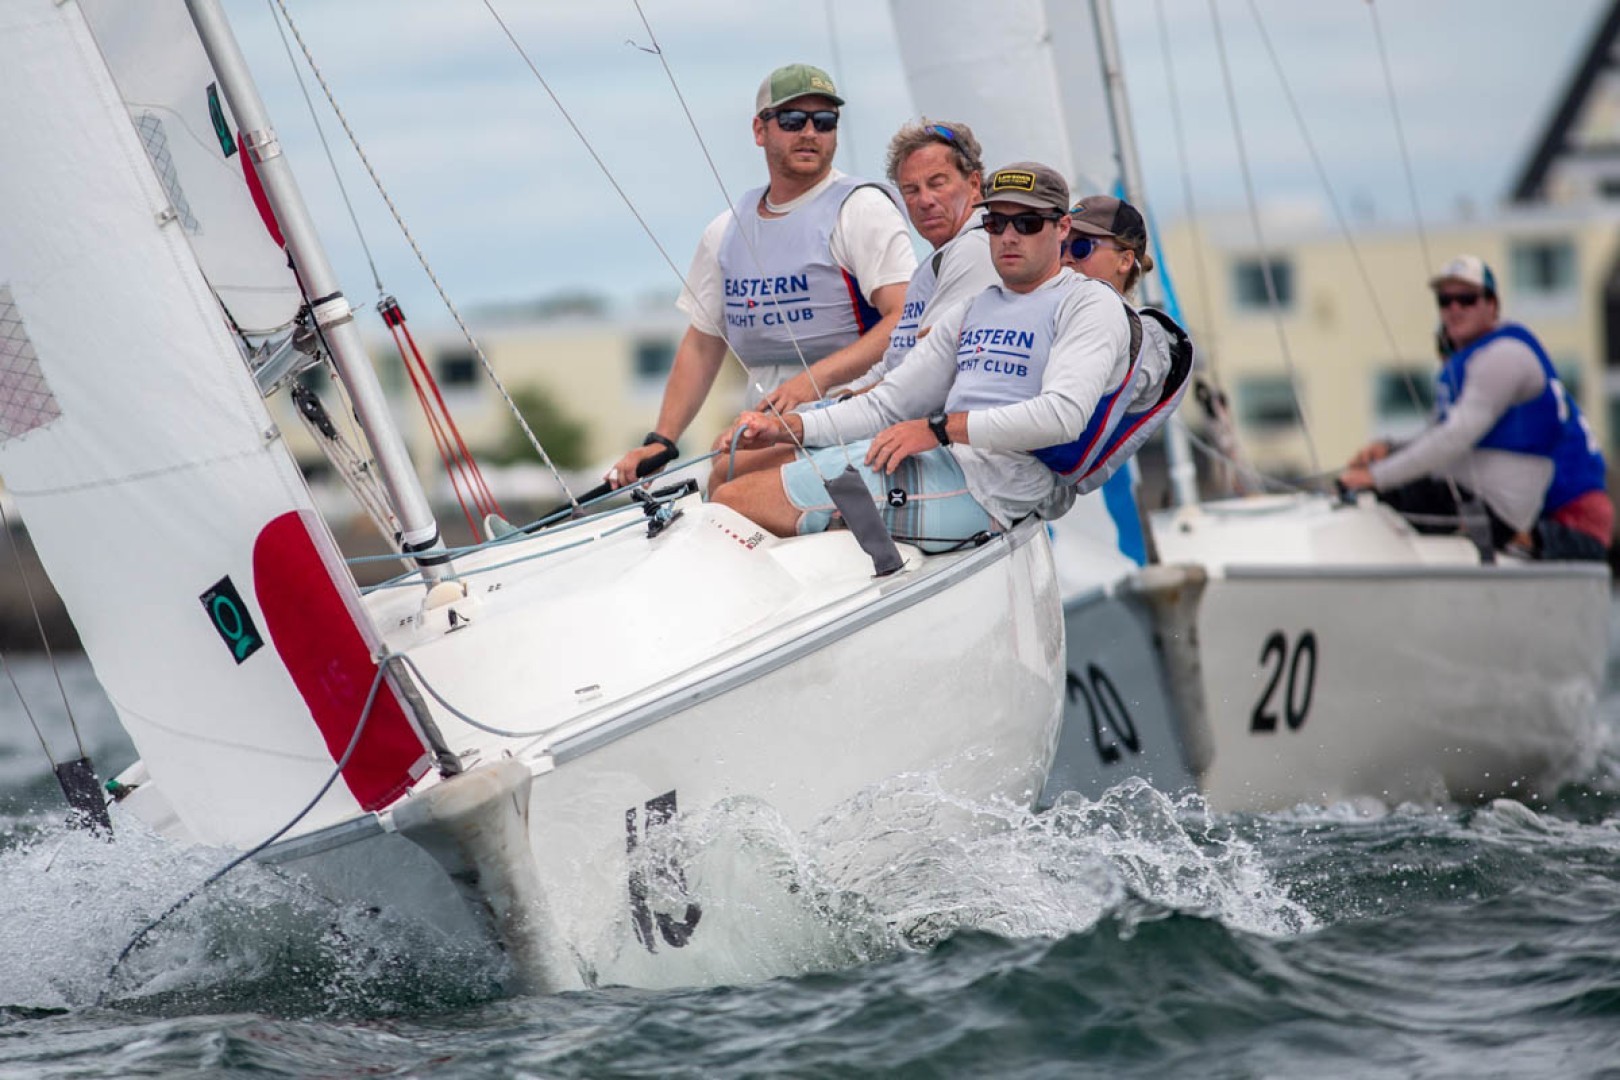 A decade of persistence lifts Eastern Yacht Club to first Morgan Cup win